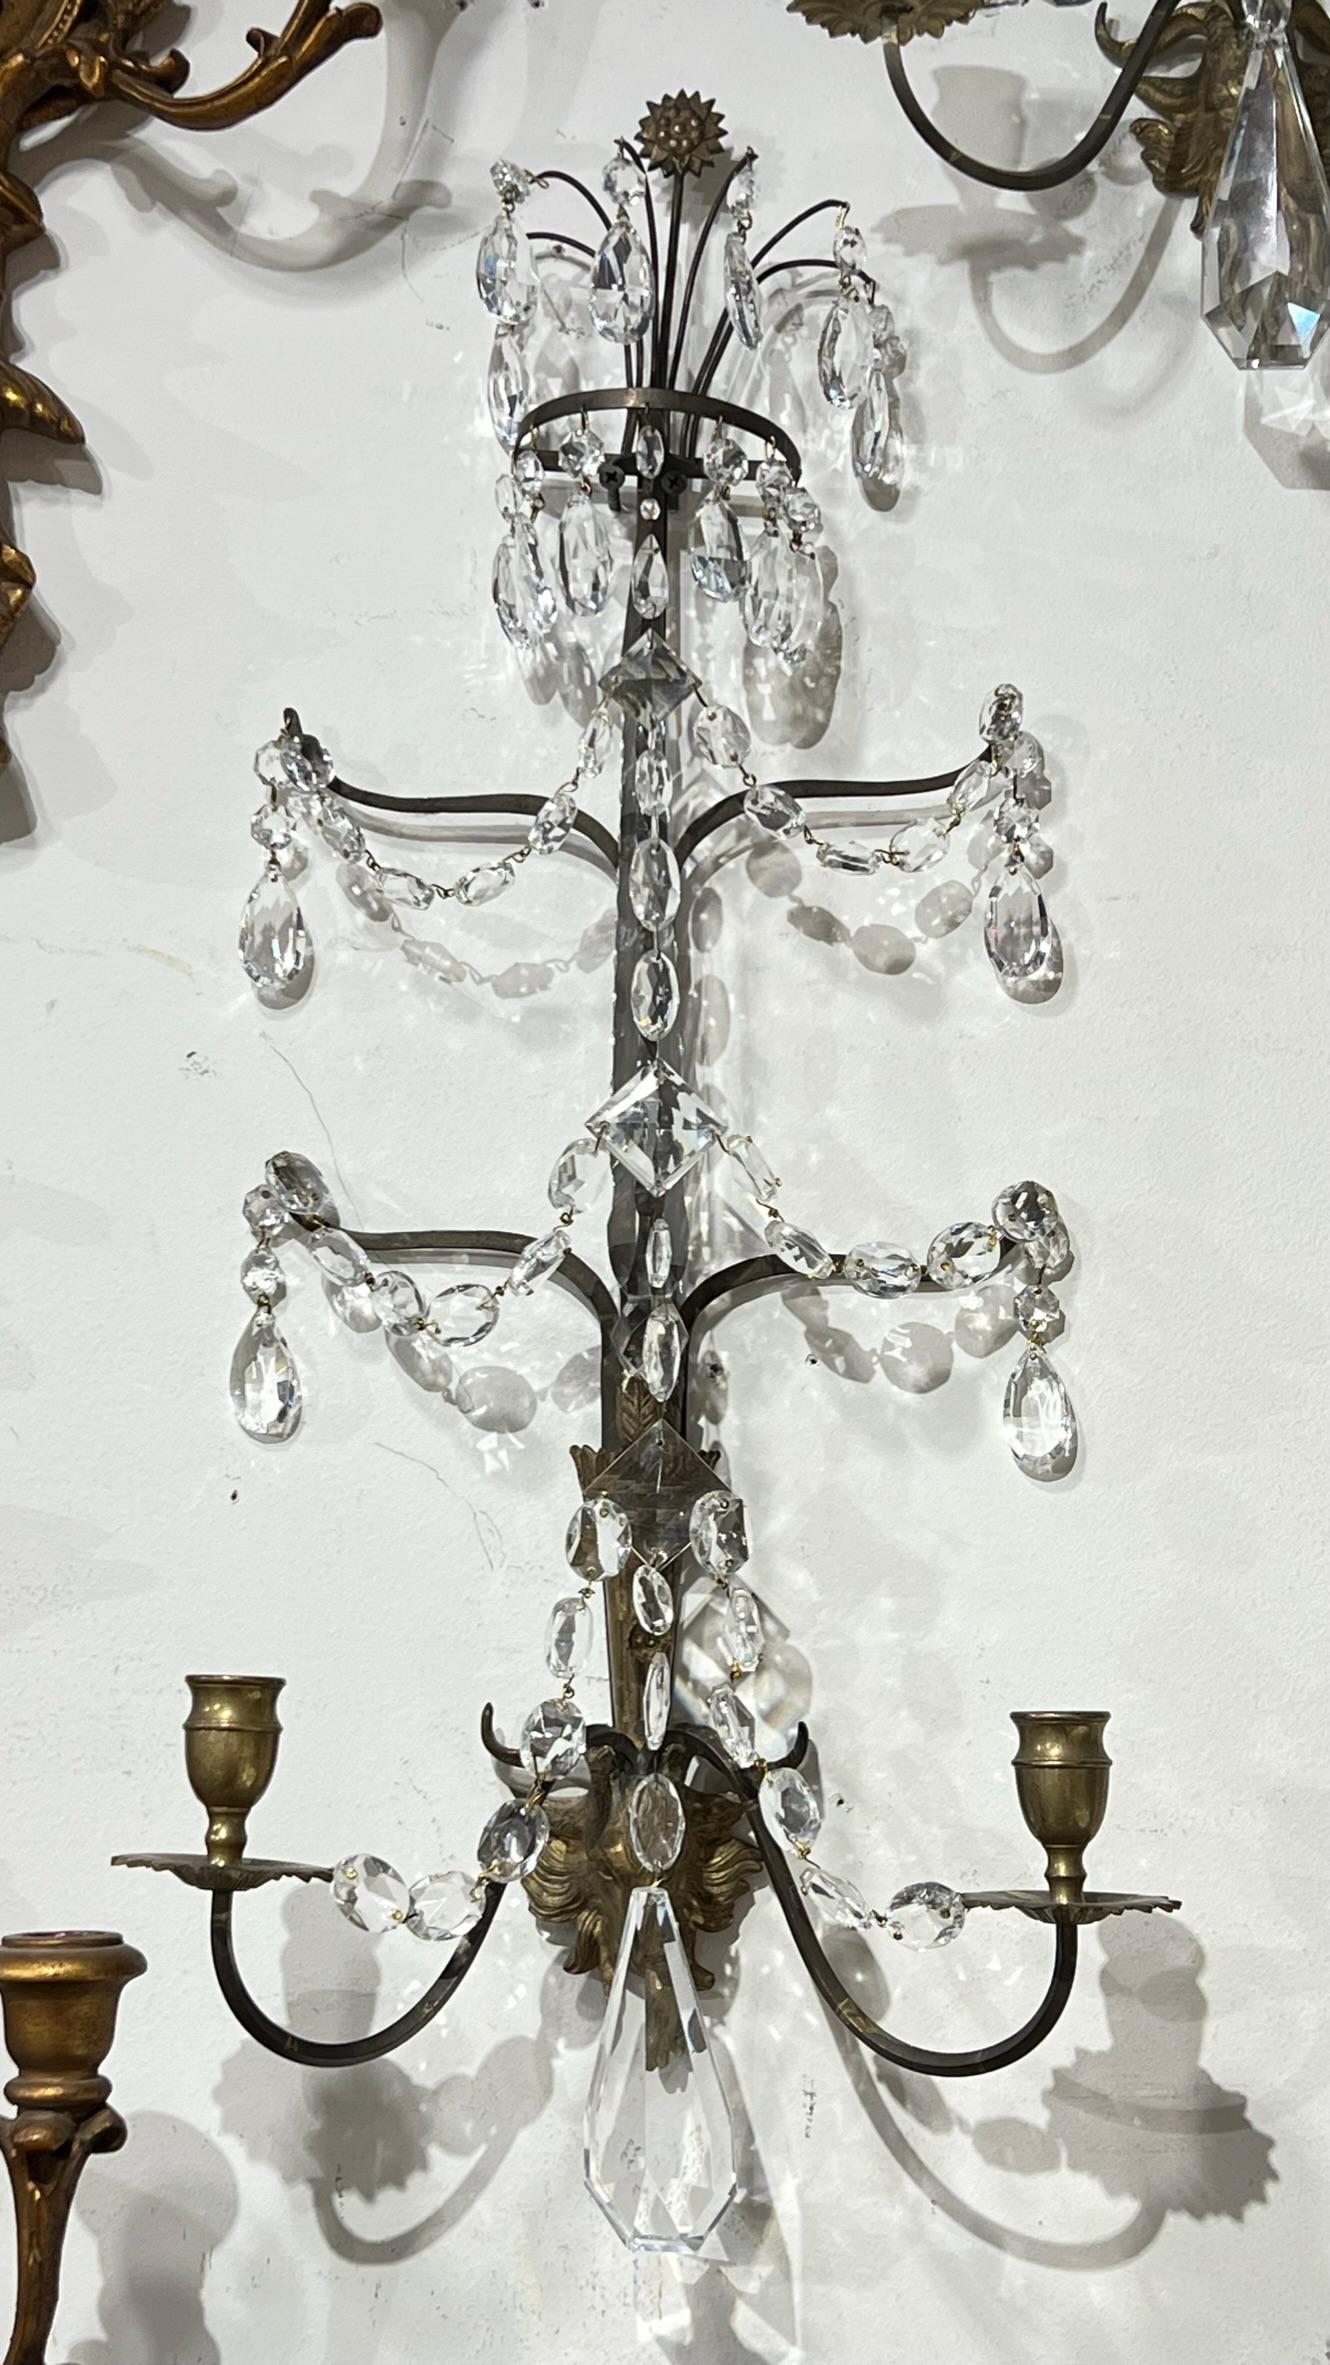 Pair 19th century French bronze wall lights in the Louis XVI style with torch form with ram head at base and surmounted by starburst, with extensive faceted crystals including swags, pear shaped drops and tall spire along the spine. May be